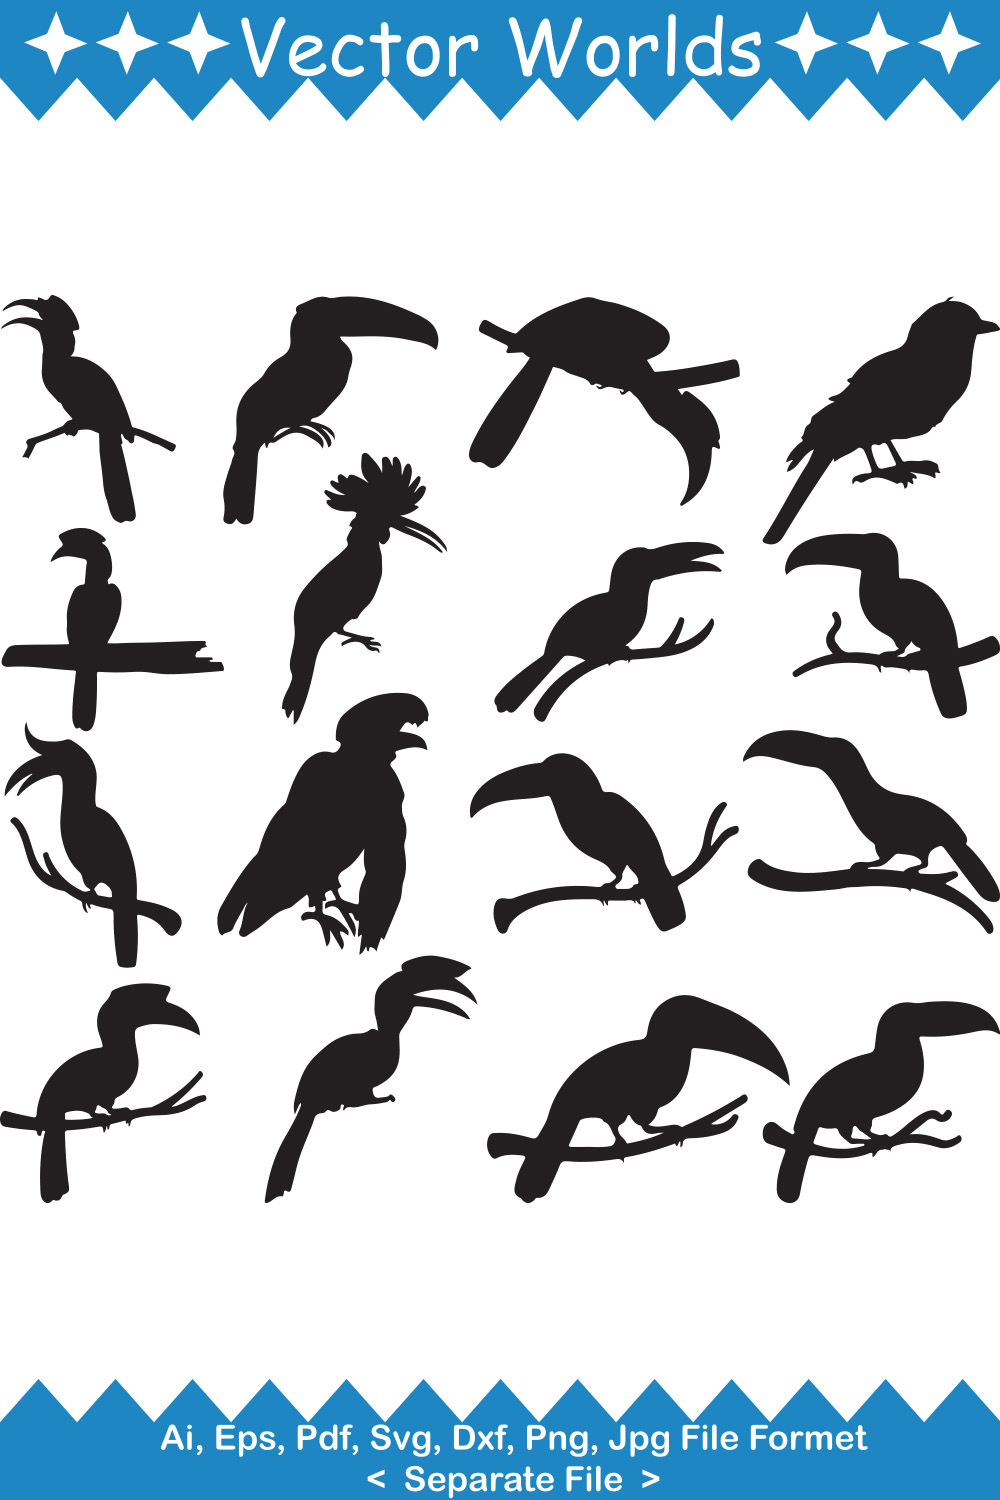 Set of birds silhouettes on a white background.